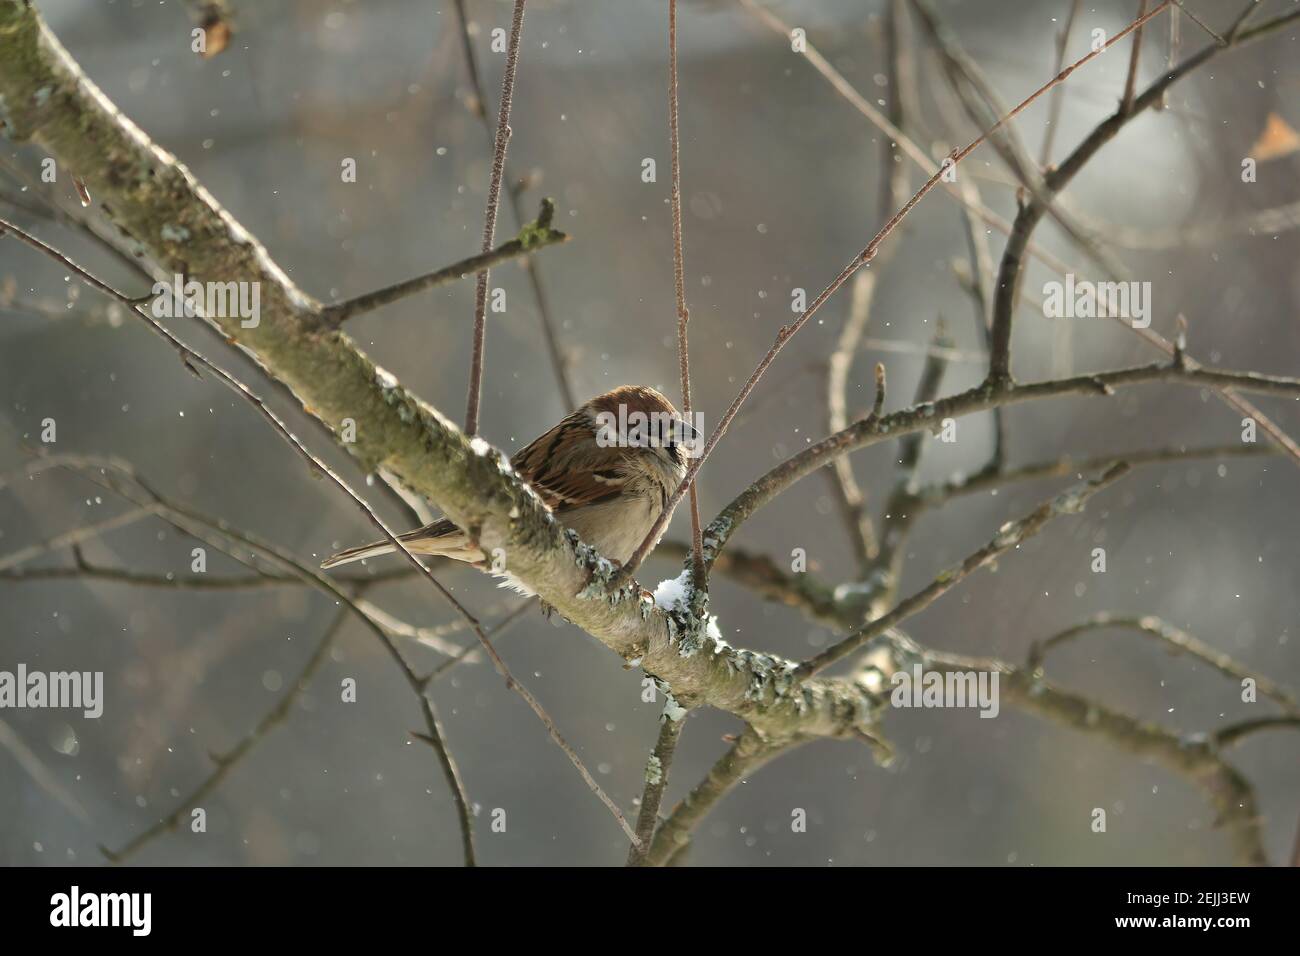 Passer montanus or Eurasian Tree Sparrow. A tree sparrow with brown plumage sits on lichen-covered birch branch against backdrop of flying snowflakes. Stock Photo